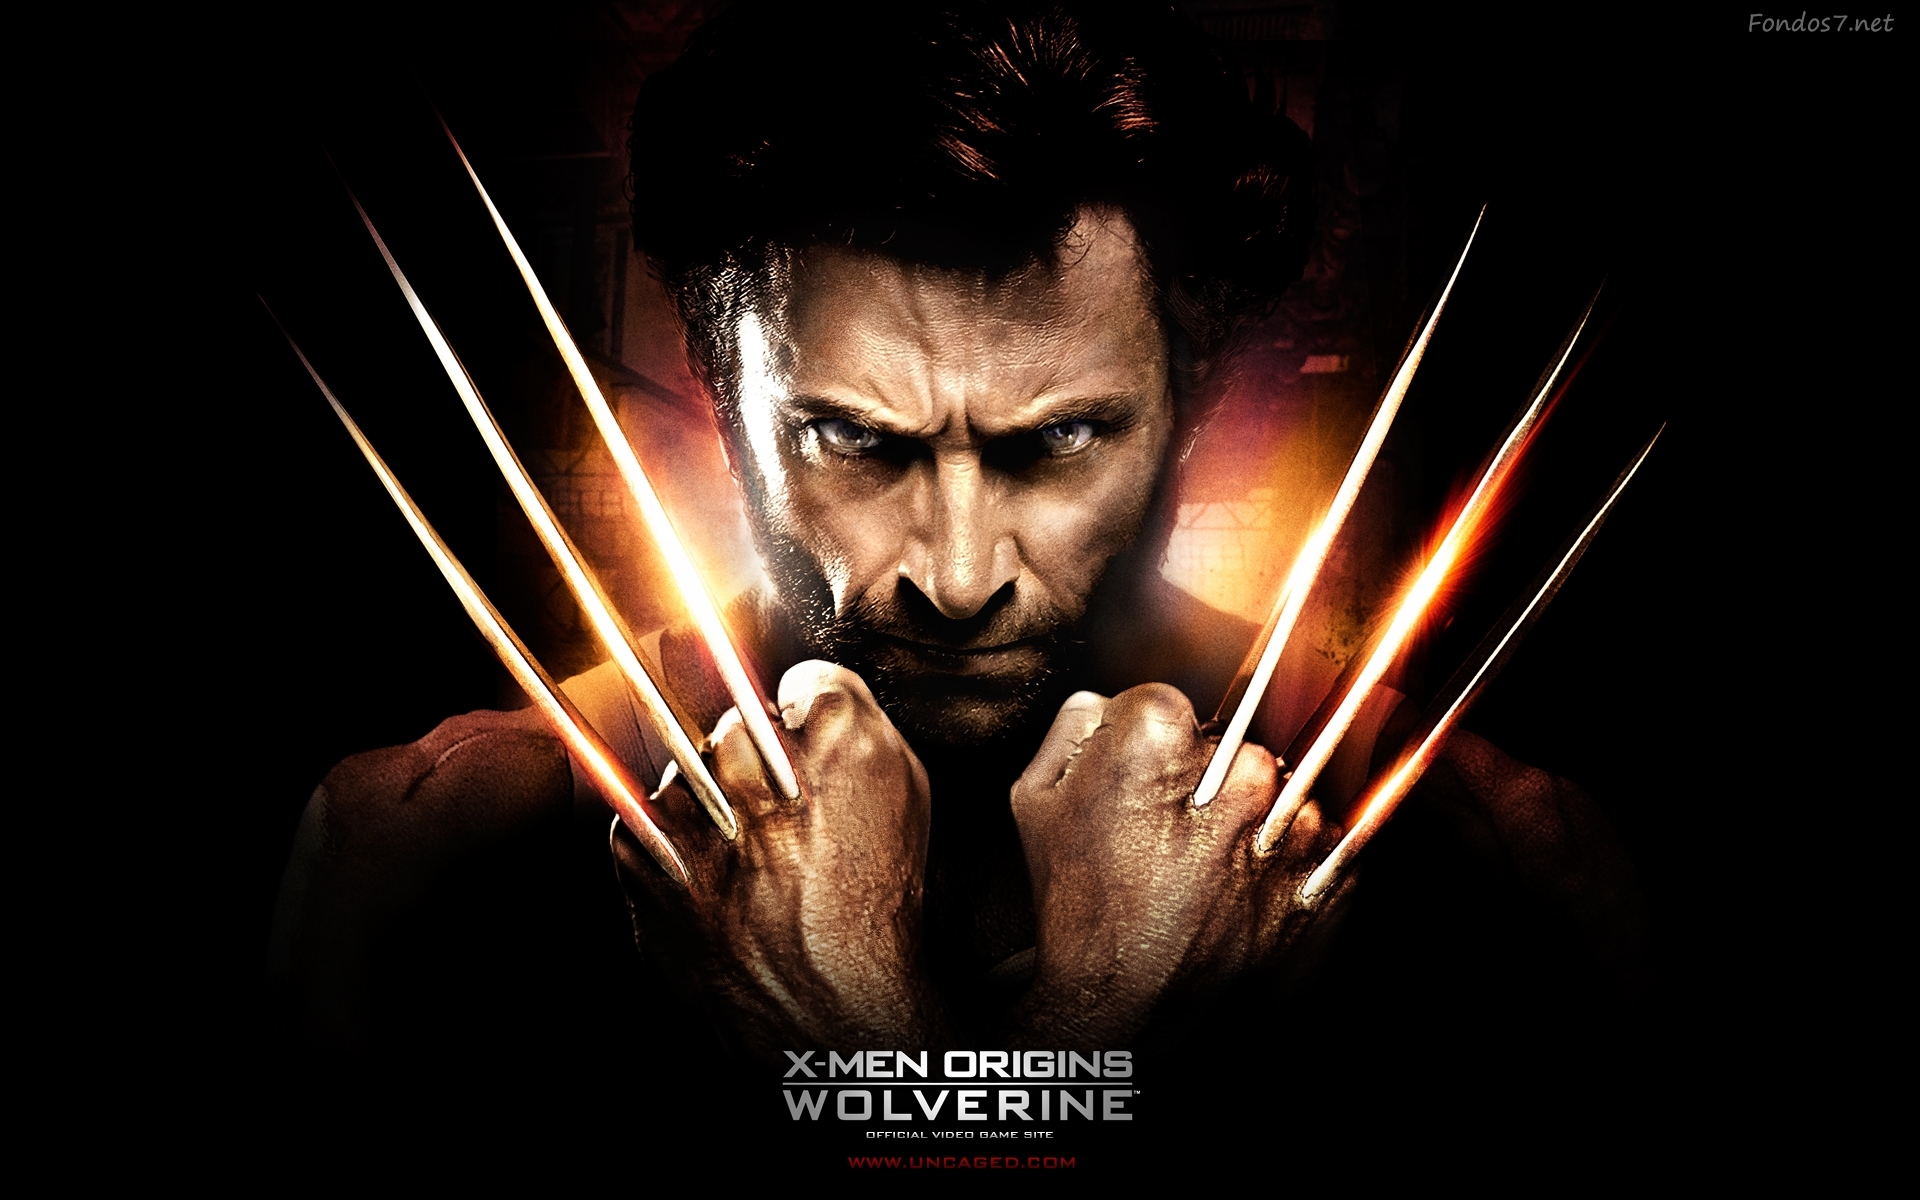 marvel wallpaper hd,wolverine,movie,action film,poster,fictional character